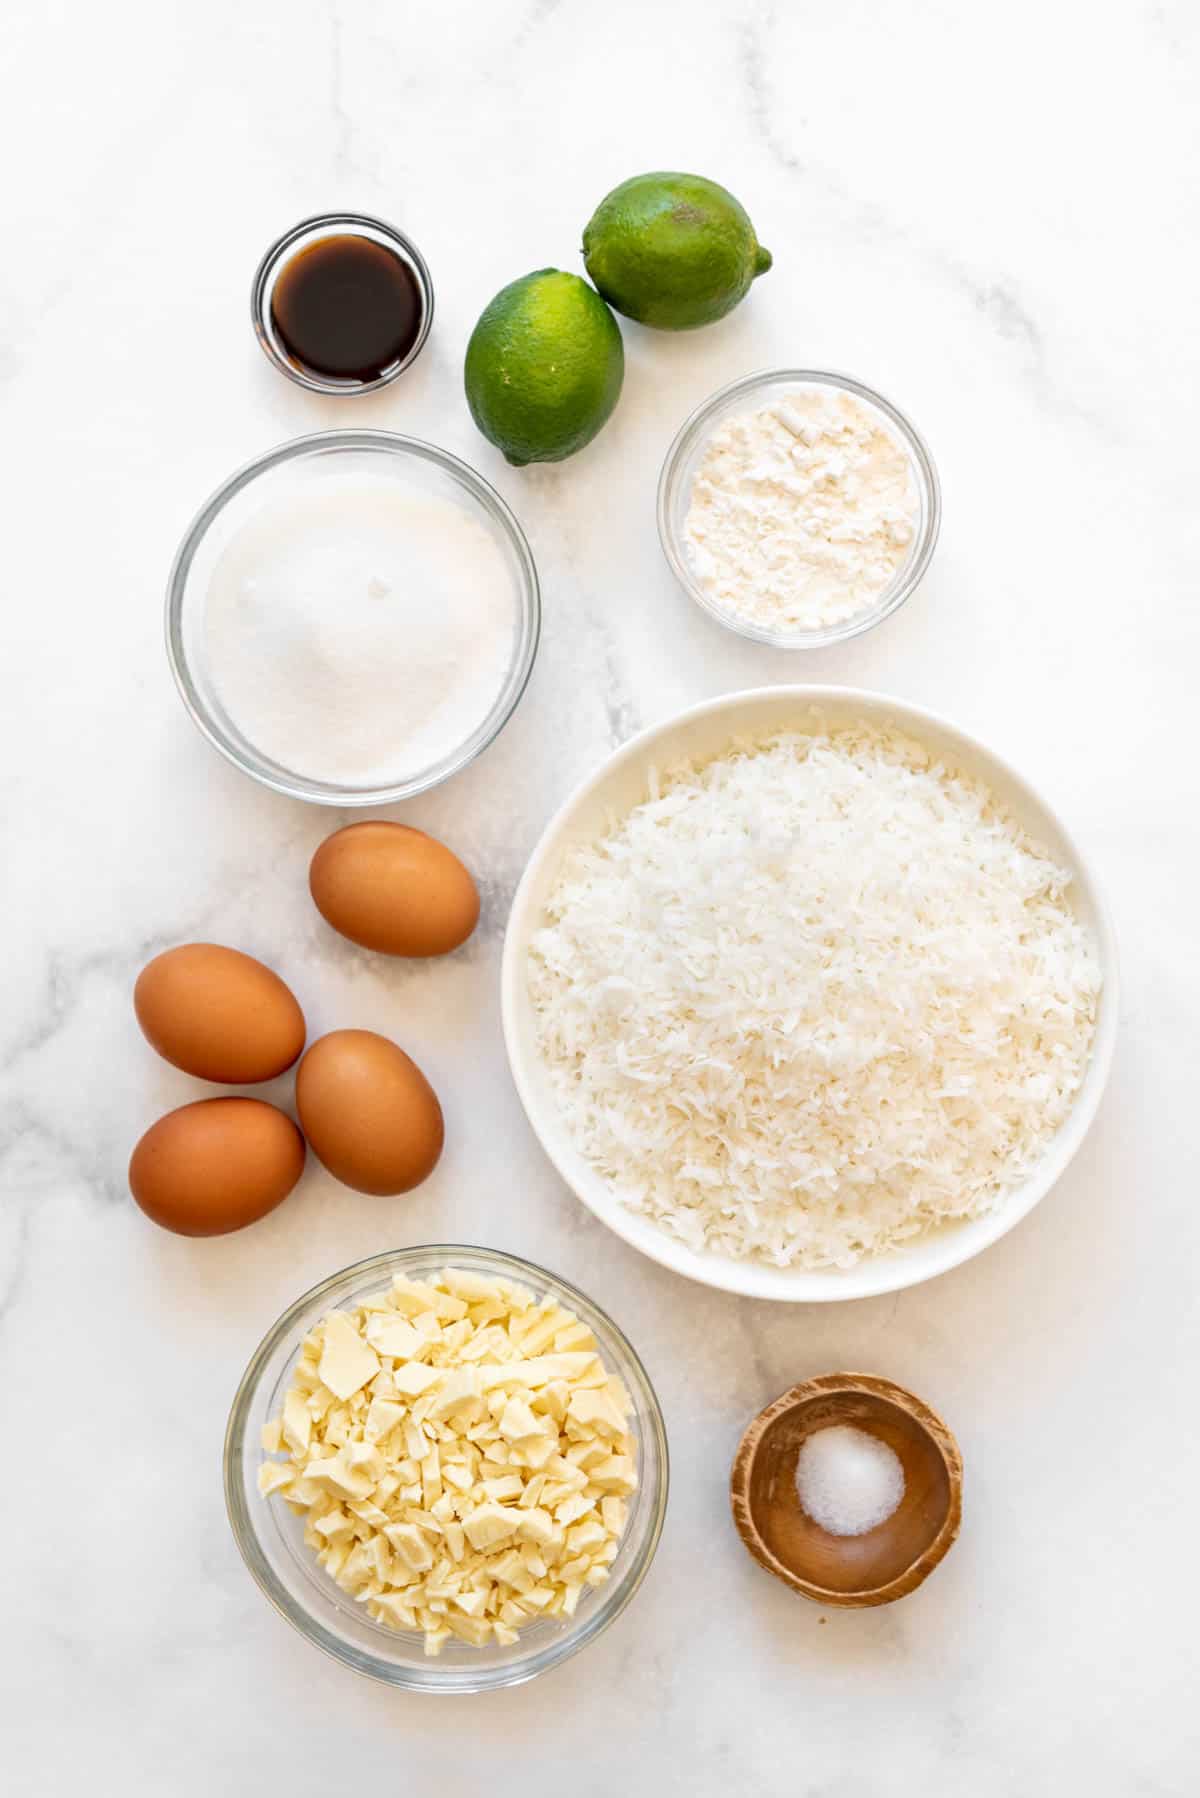 Ingredients for making coconut lime macaroons.